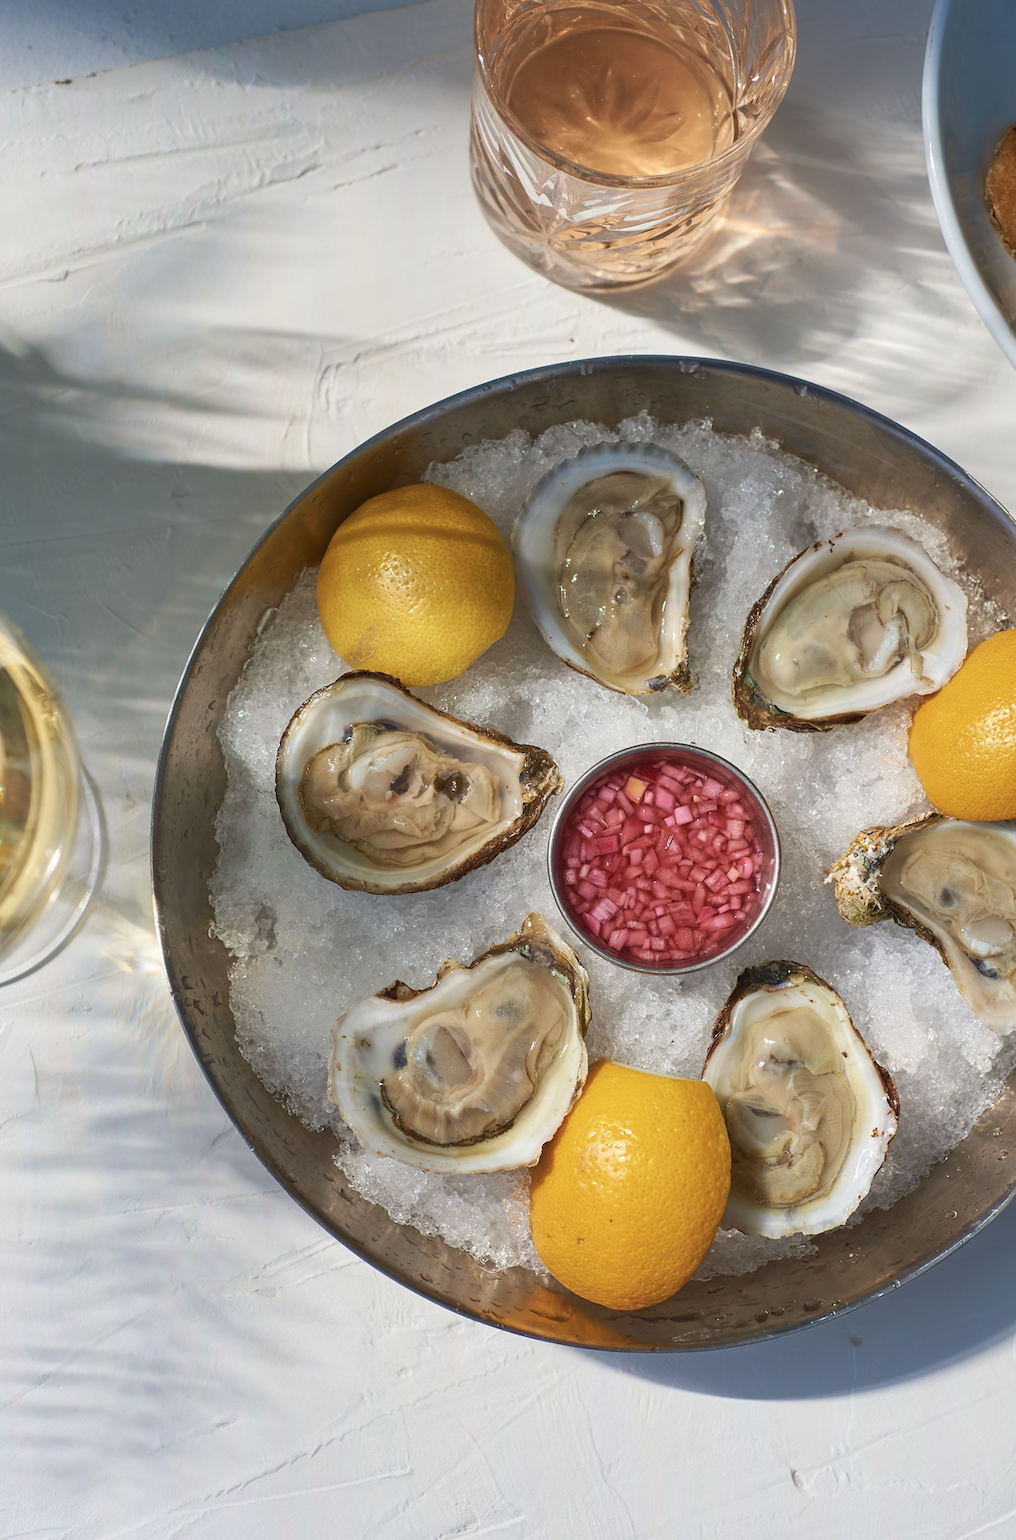 $1 Oysters Served at the Bar During Happy Hour